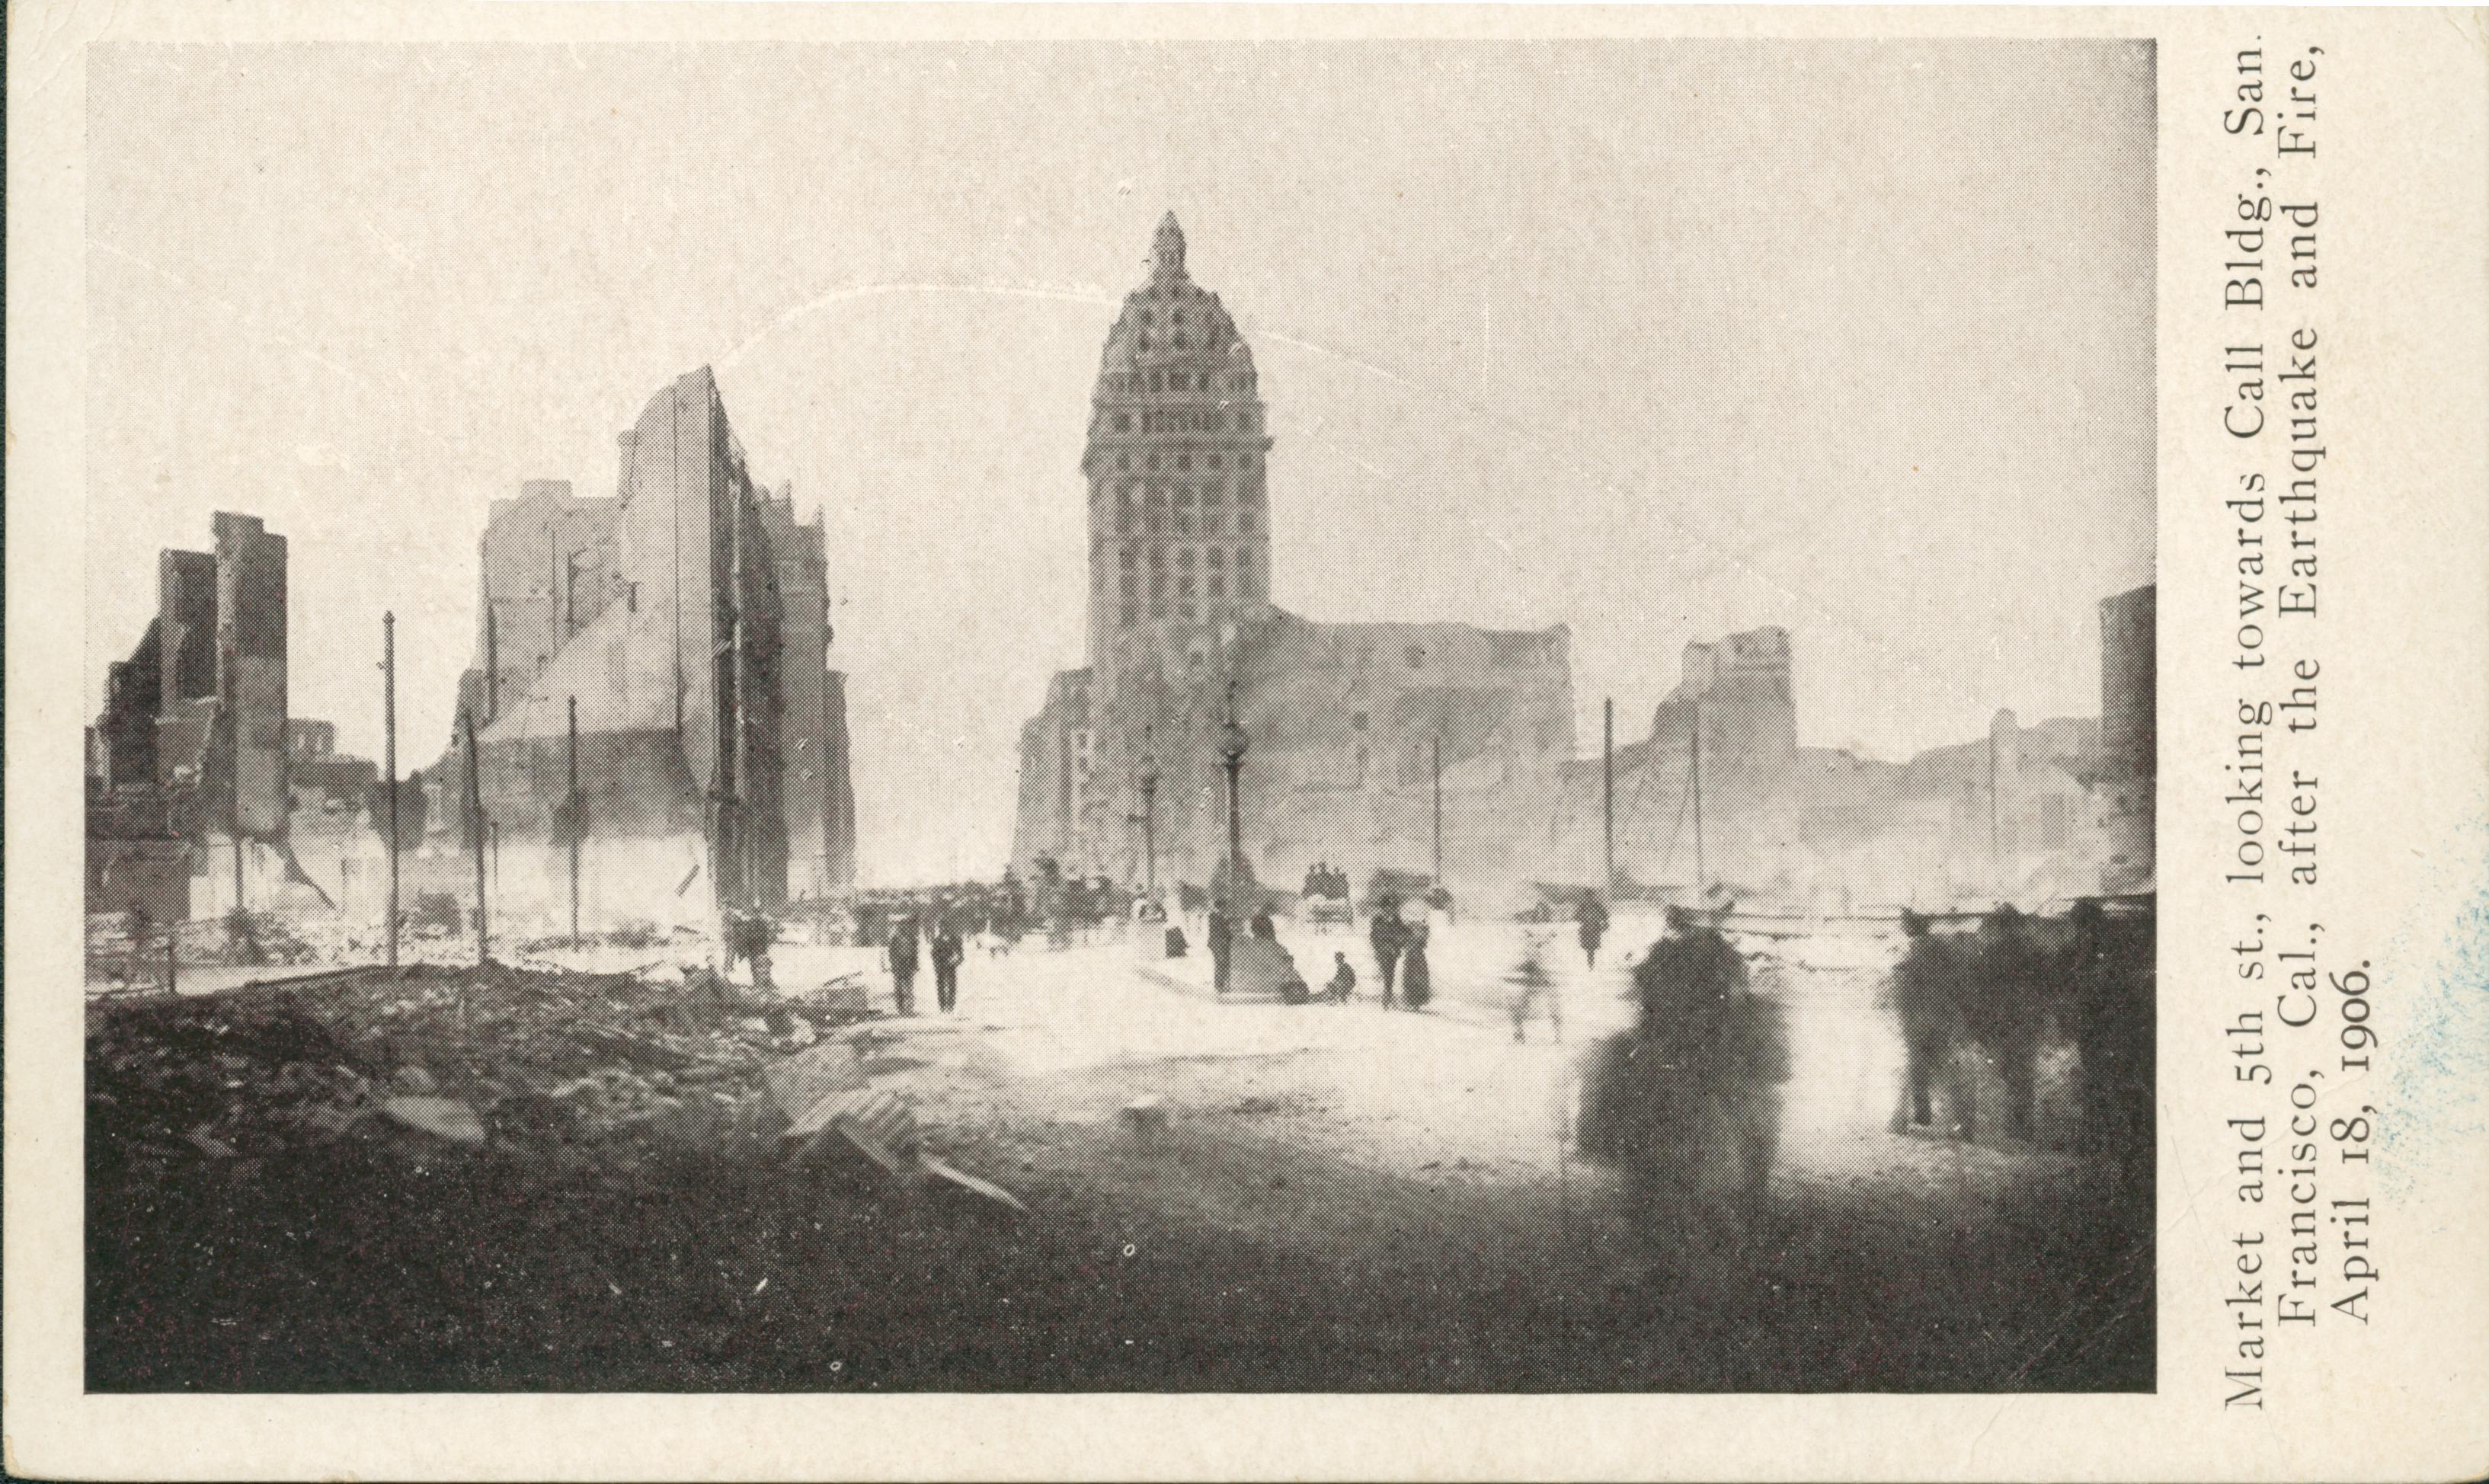 Shows the destruction along Market street looking towards the Call Building.